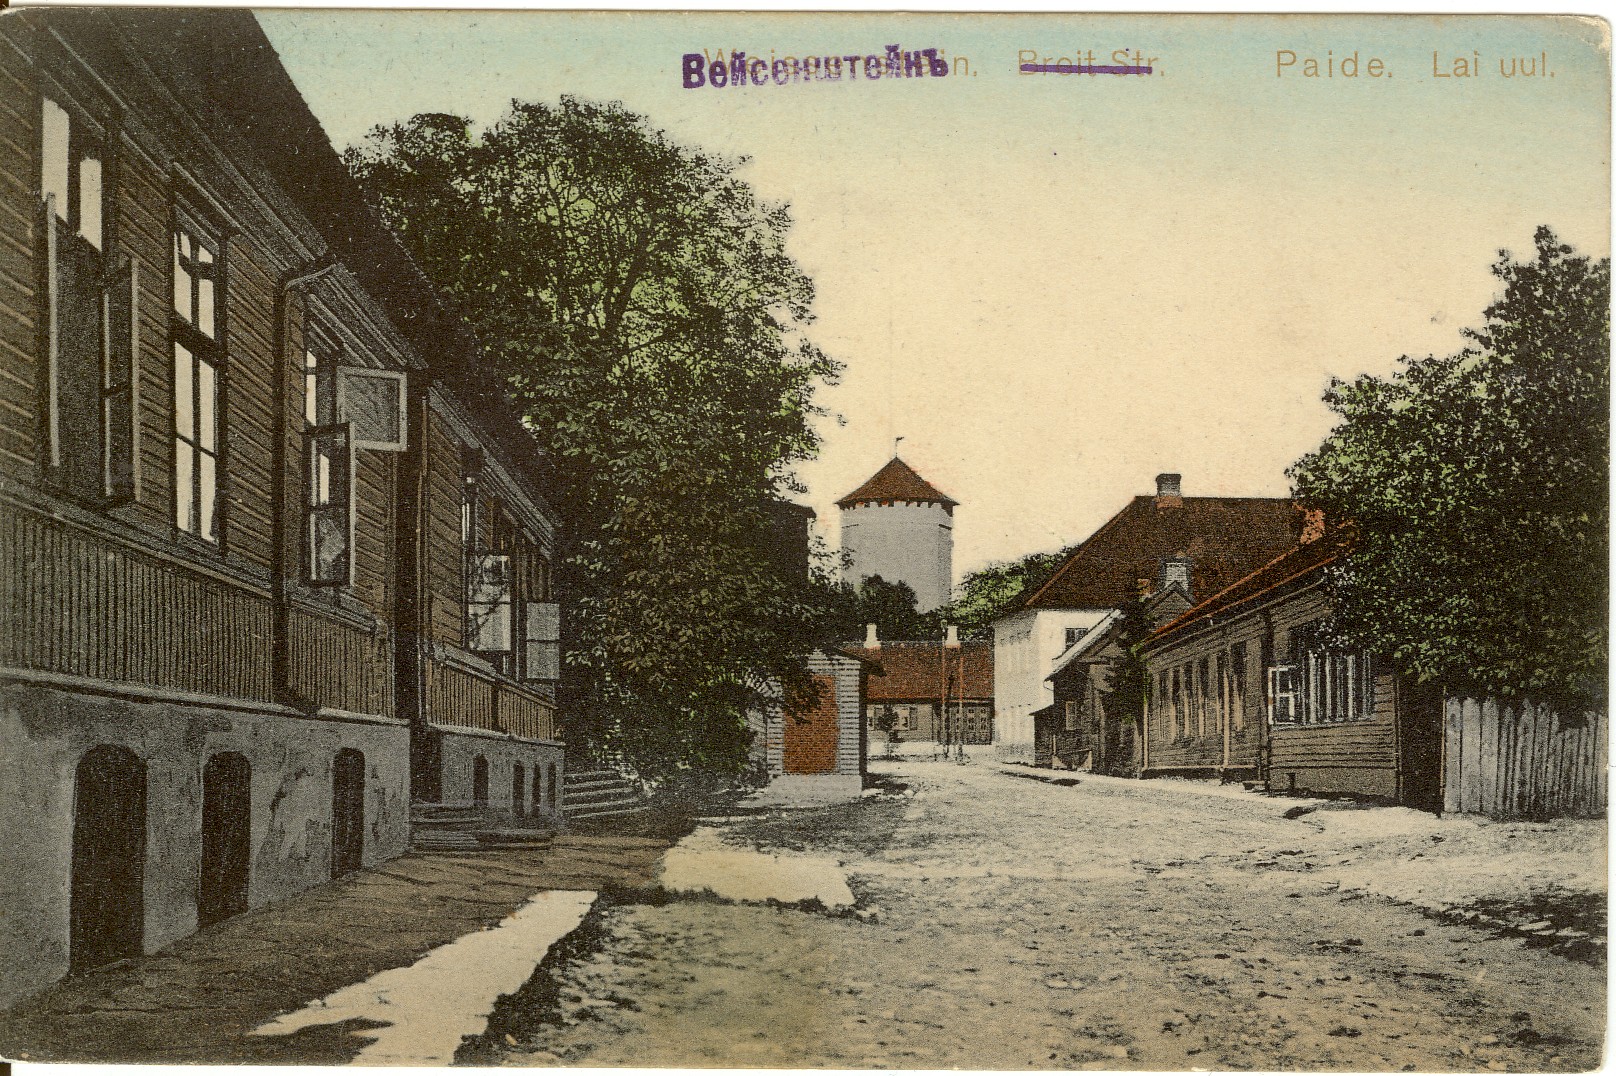 Wide Street in Paides